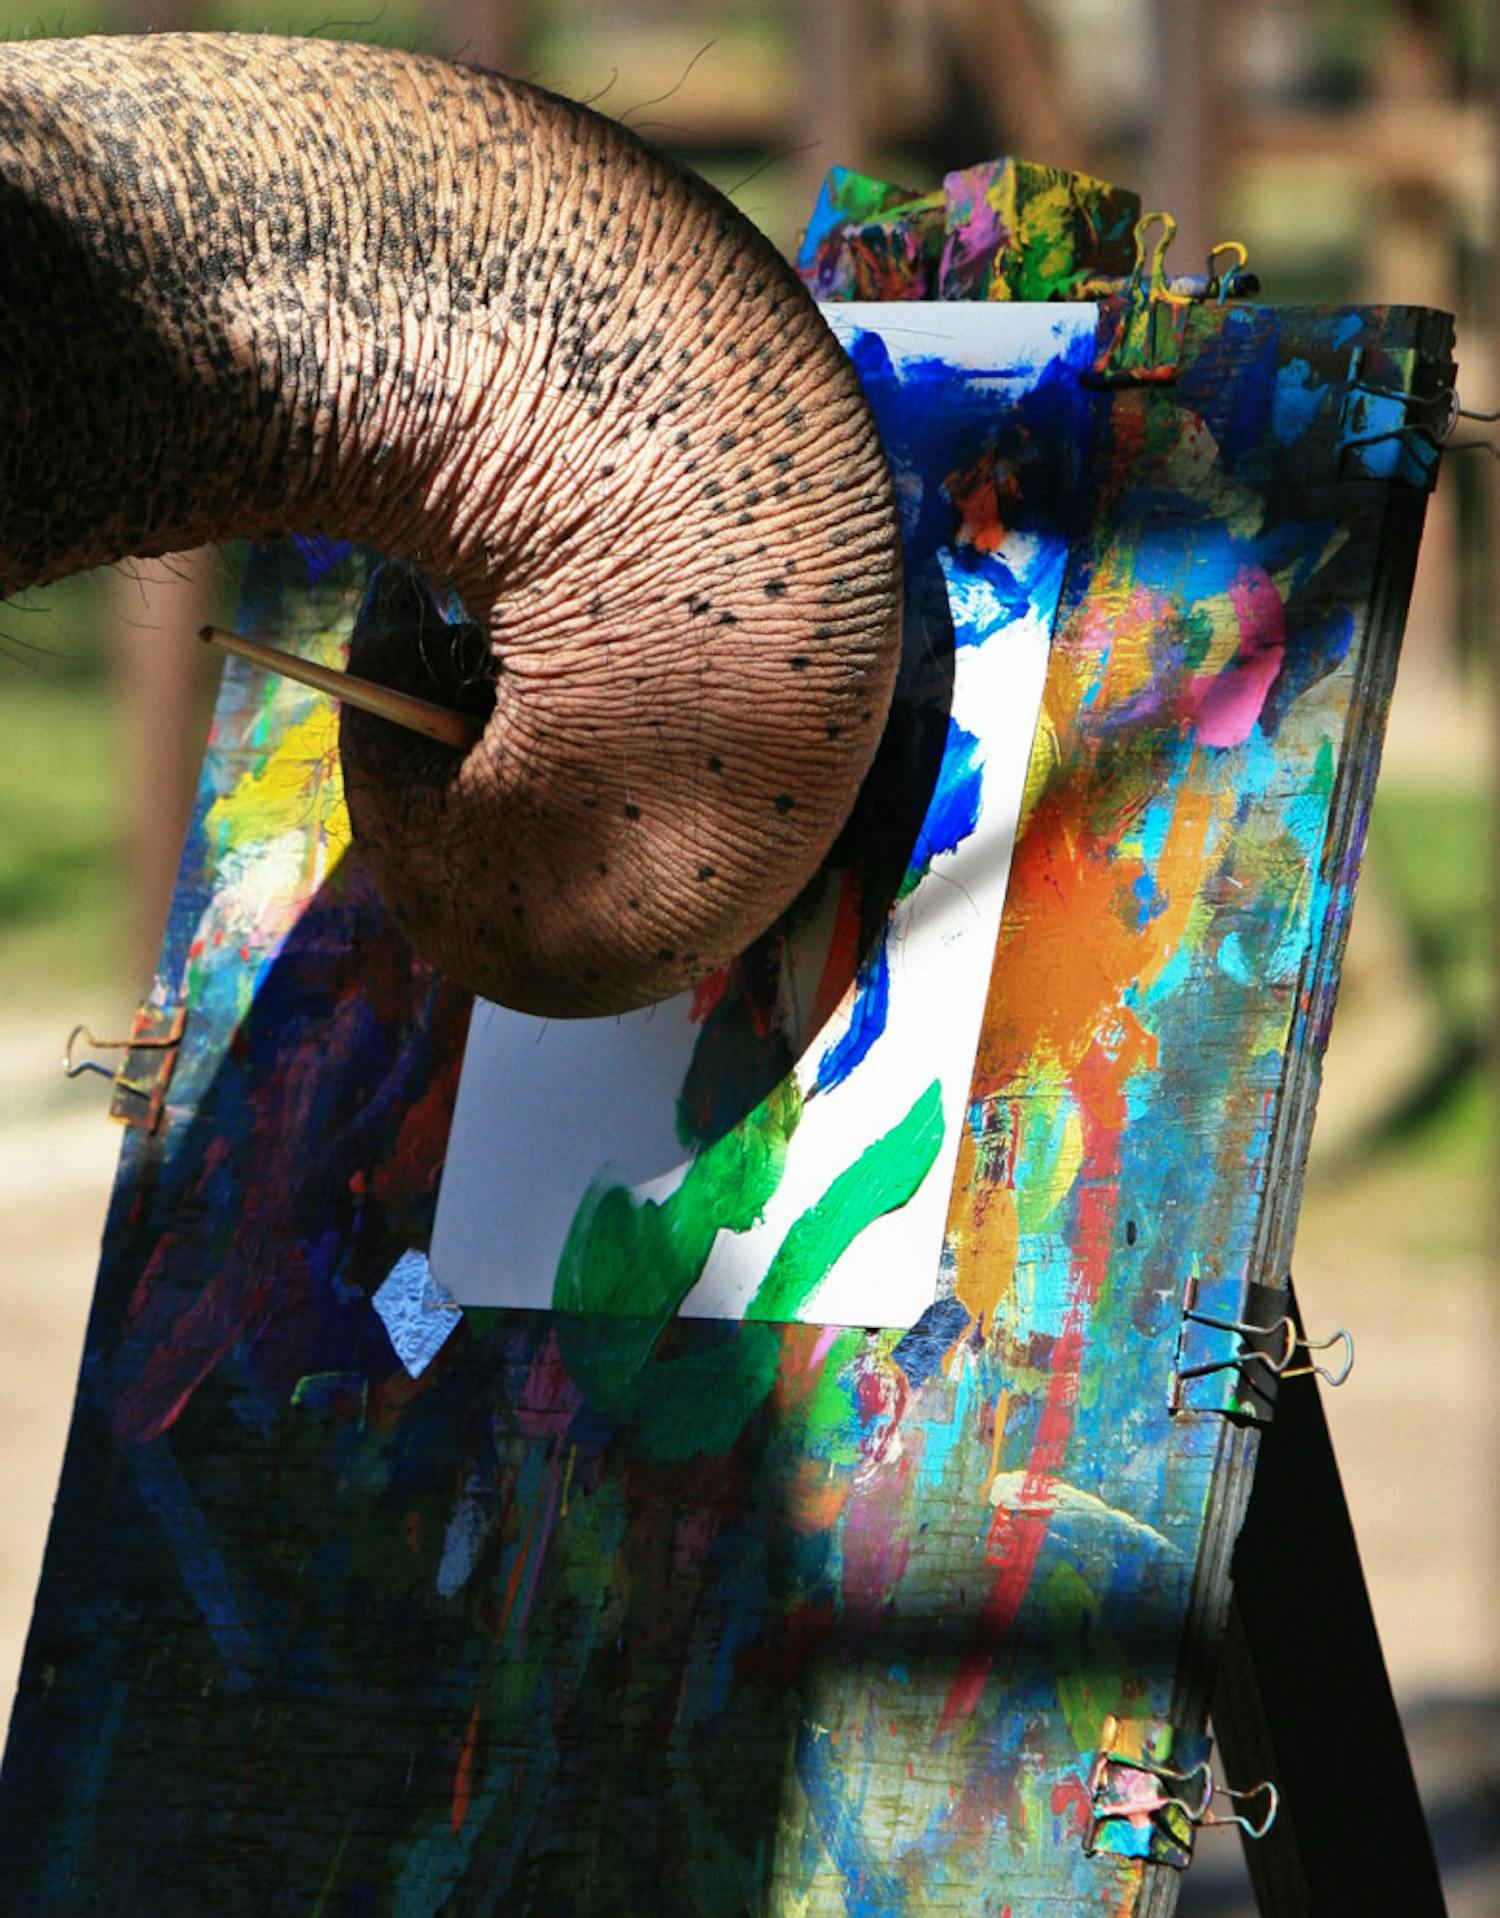 Luke, a 28-year-old Asian elephant, paints a picture for the audience at Two Tails Ranch located in Williston, Florida. The ranch is owned by Patricia Zerbini, 47, who has dedicated her life to training the elephants and studying exotic animals.